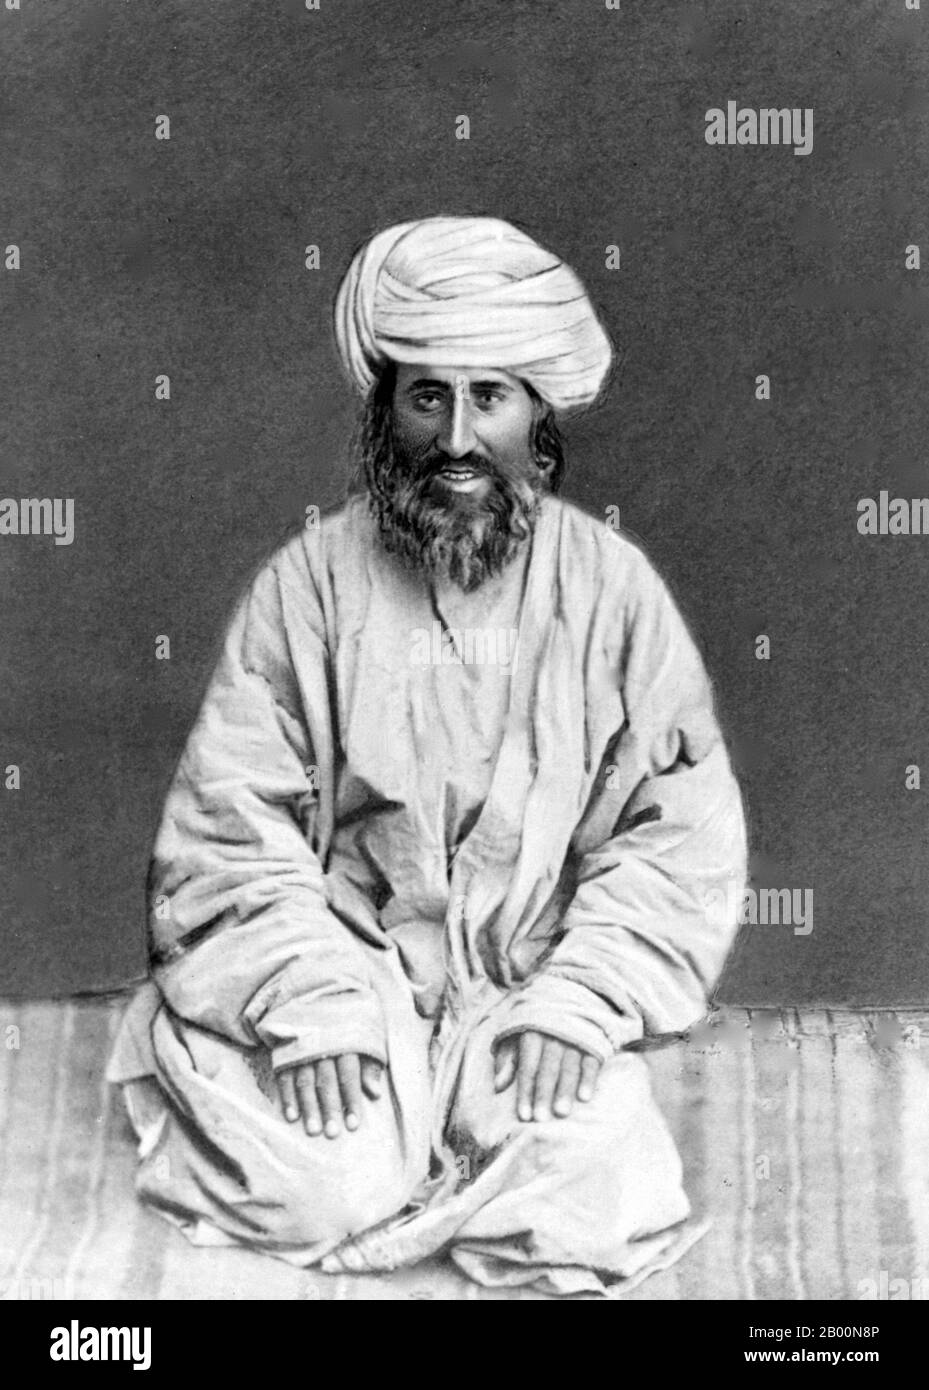 Afghanistan: Pashtun man, late 19th century.  Pashtuns, also called Pathans, are an Eastern Iranian ethno-linguistic group with populations primarily in Afghanistan and northwestern Pakistan, which includes Khyber-Pakhtunkhwa, Federally Administered Tribal Areas (FATA) and Balochistan. The Pashtuns are typically characterized by their usage of the Pashto language and practice of Pashtunwali, a traditional set of ethics guiding individual and communal conduct. Stock Photo